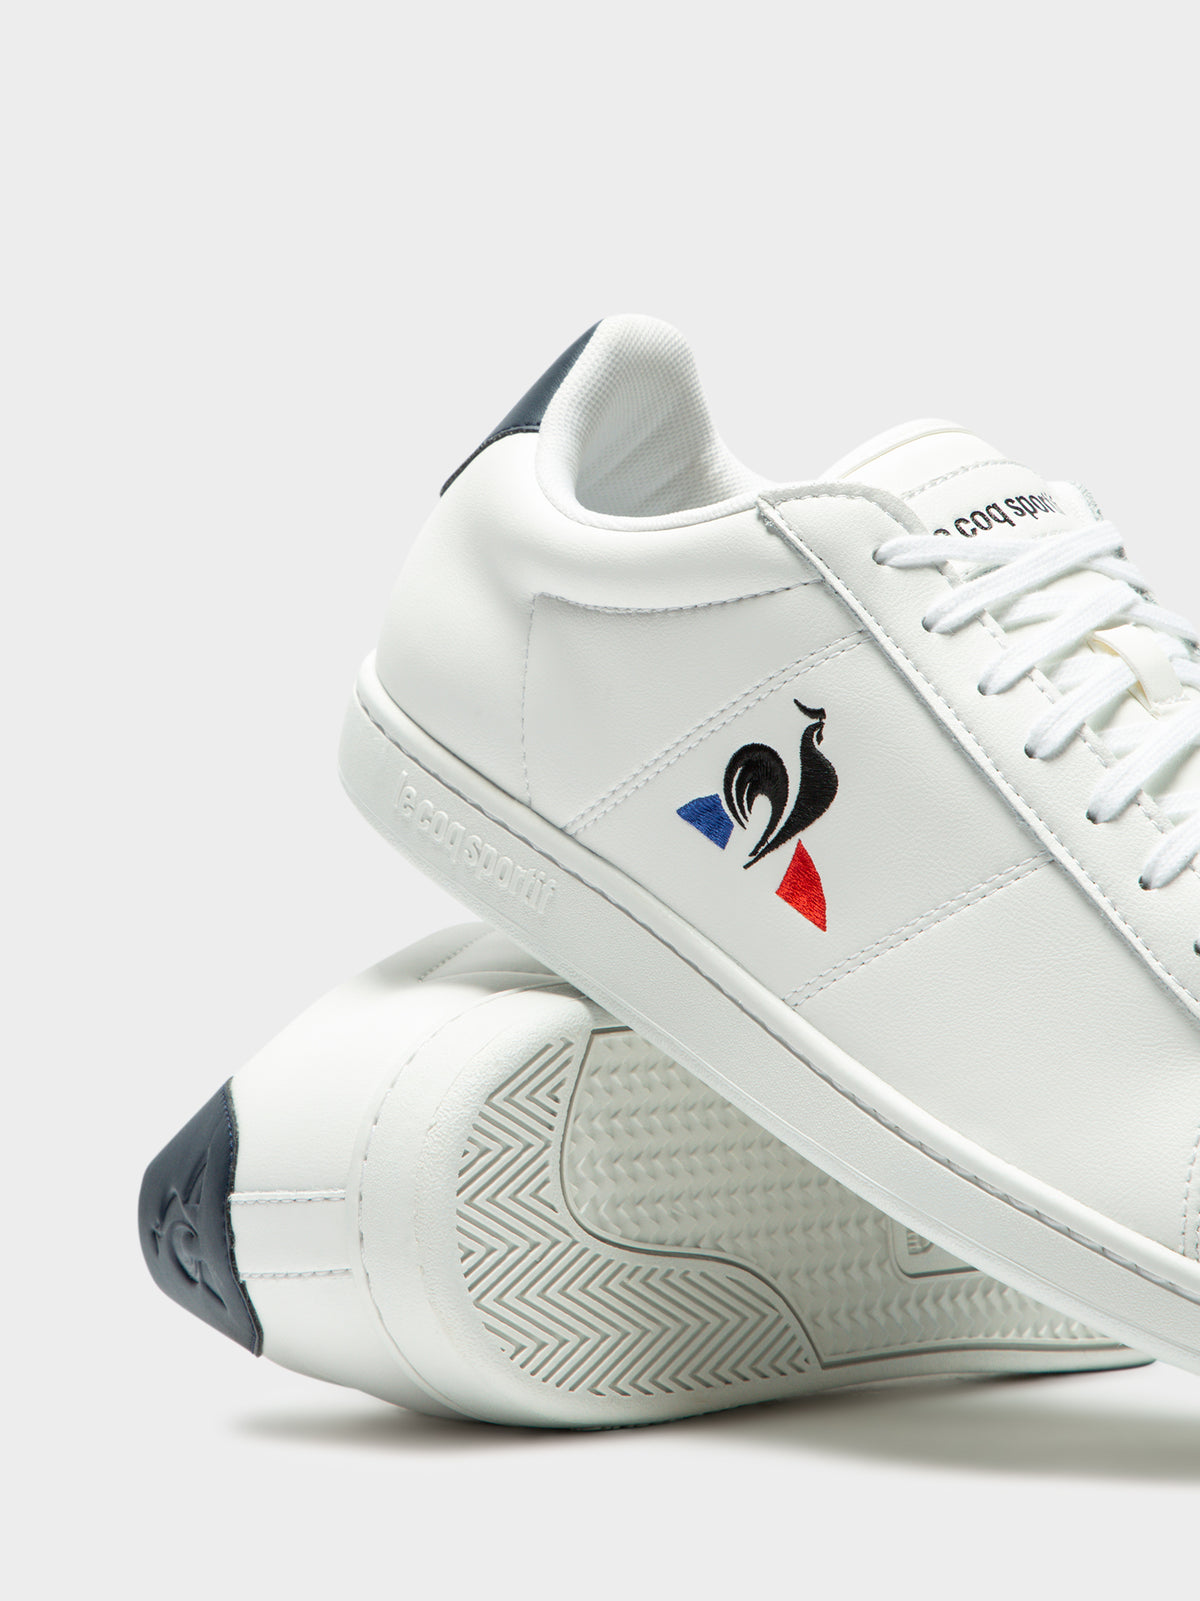 Mens Courtset Sneakers in White